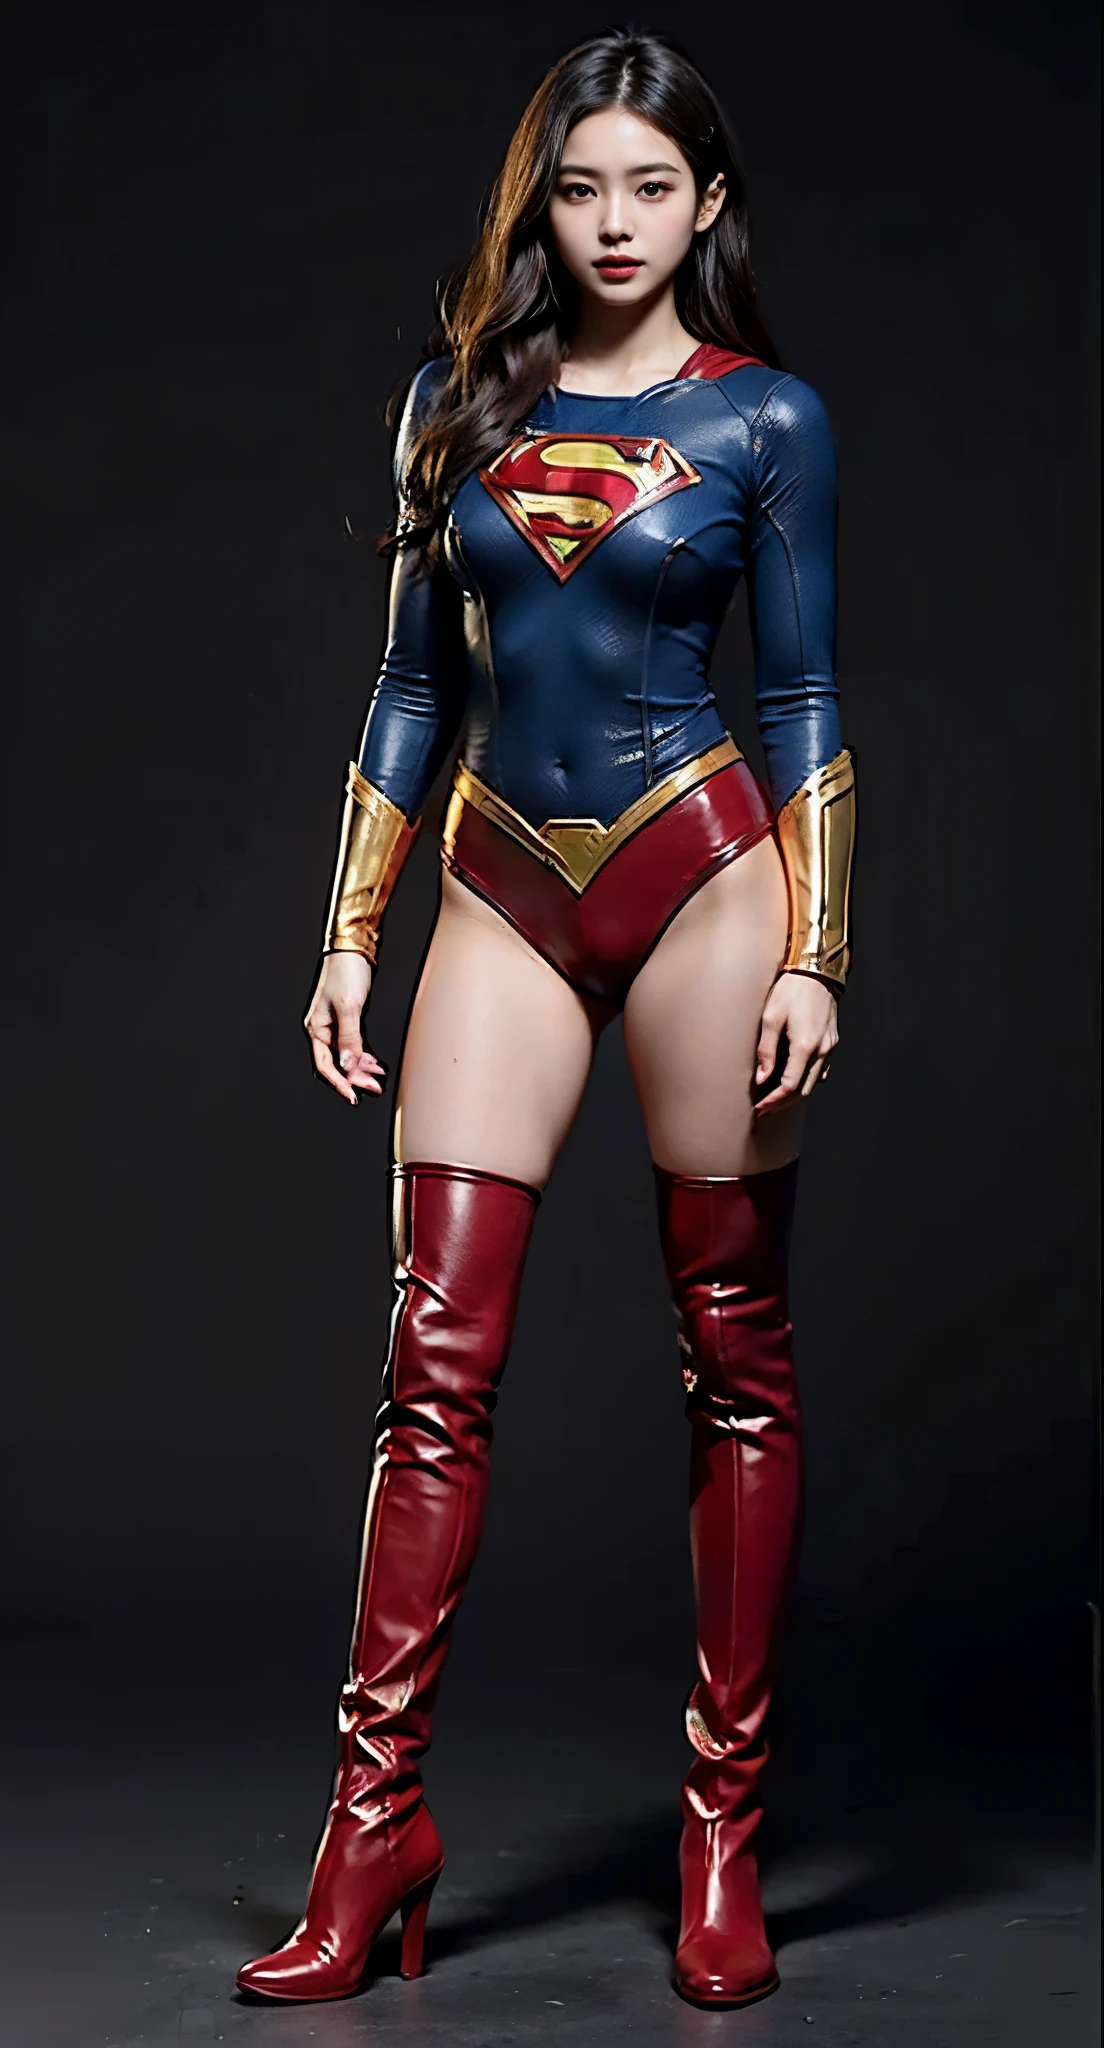 asian beautiful girl、(((Wear black tights on your beautiful legs.)))、(((beautiful feet)))、(((smiling face)))、((((Make the most of your original images)))、(((Supergirl costumes)))、(((short bob、beautiful hair)))、(((suffering)))、(((Black tights must be worn on the legust wear red boots)))、((best image quality、8K))、((highest quality、8K、masterpiece:1.3))、(((Keep your background simple)))、sharp focus:1.2、beautiful woman with perfect figure:1.4、thin abs:1.2、wet body:1.5、Highly detailed face and skin texture、8K、beautiful feet